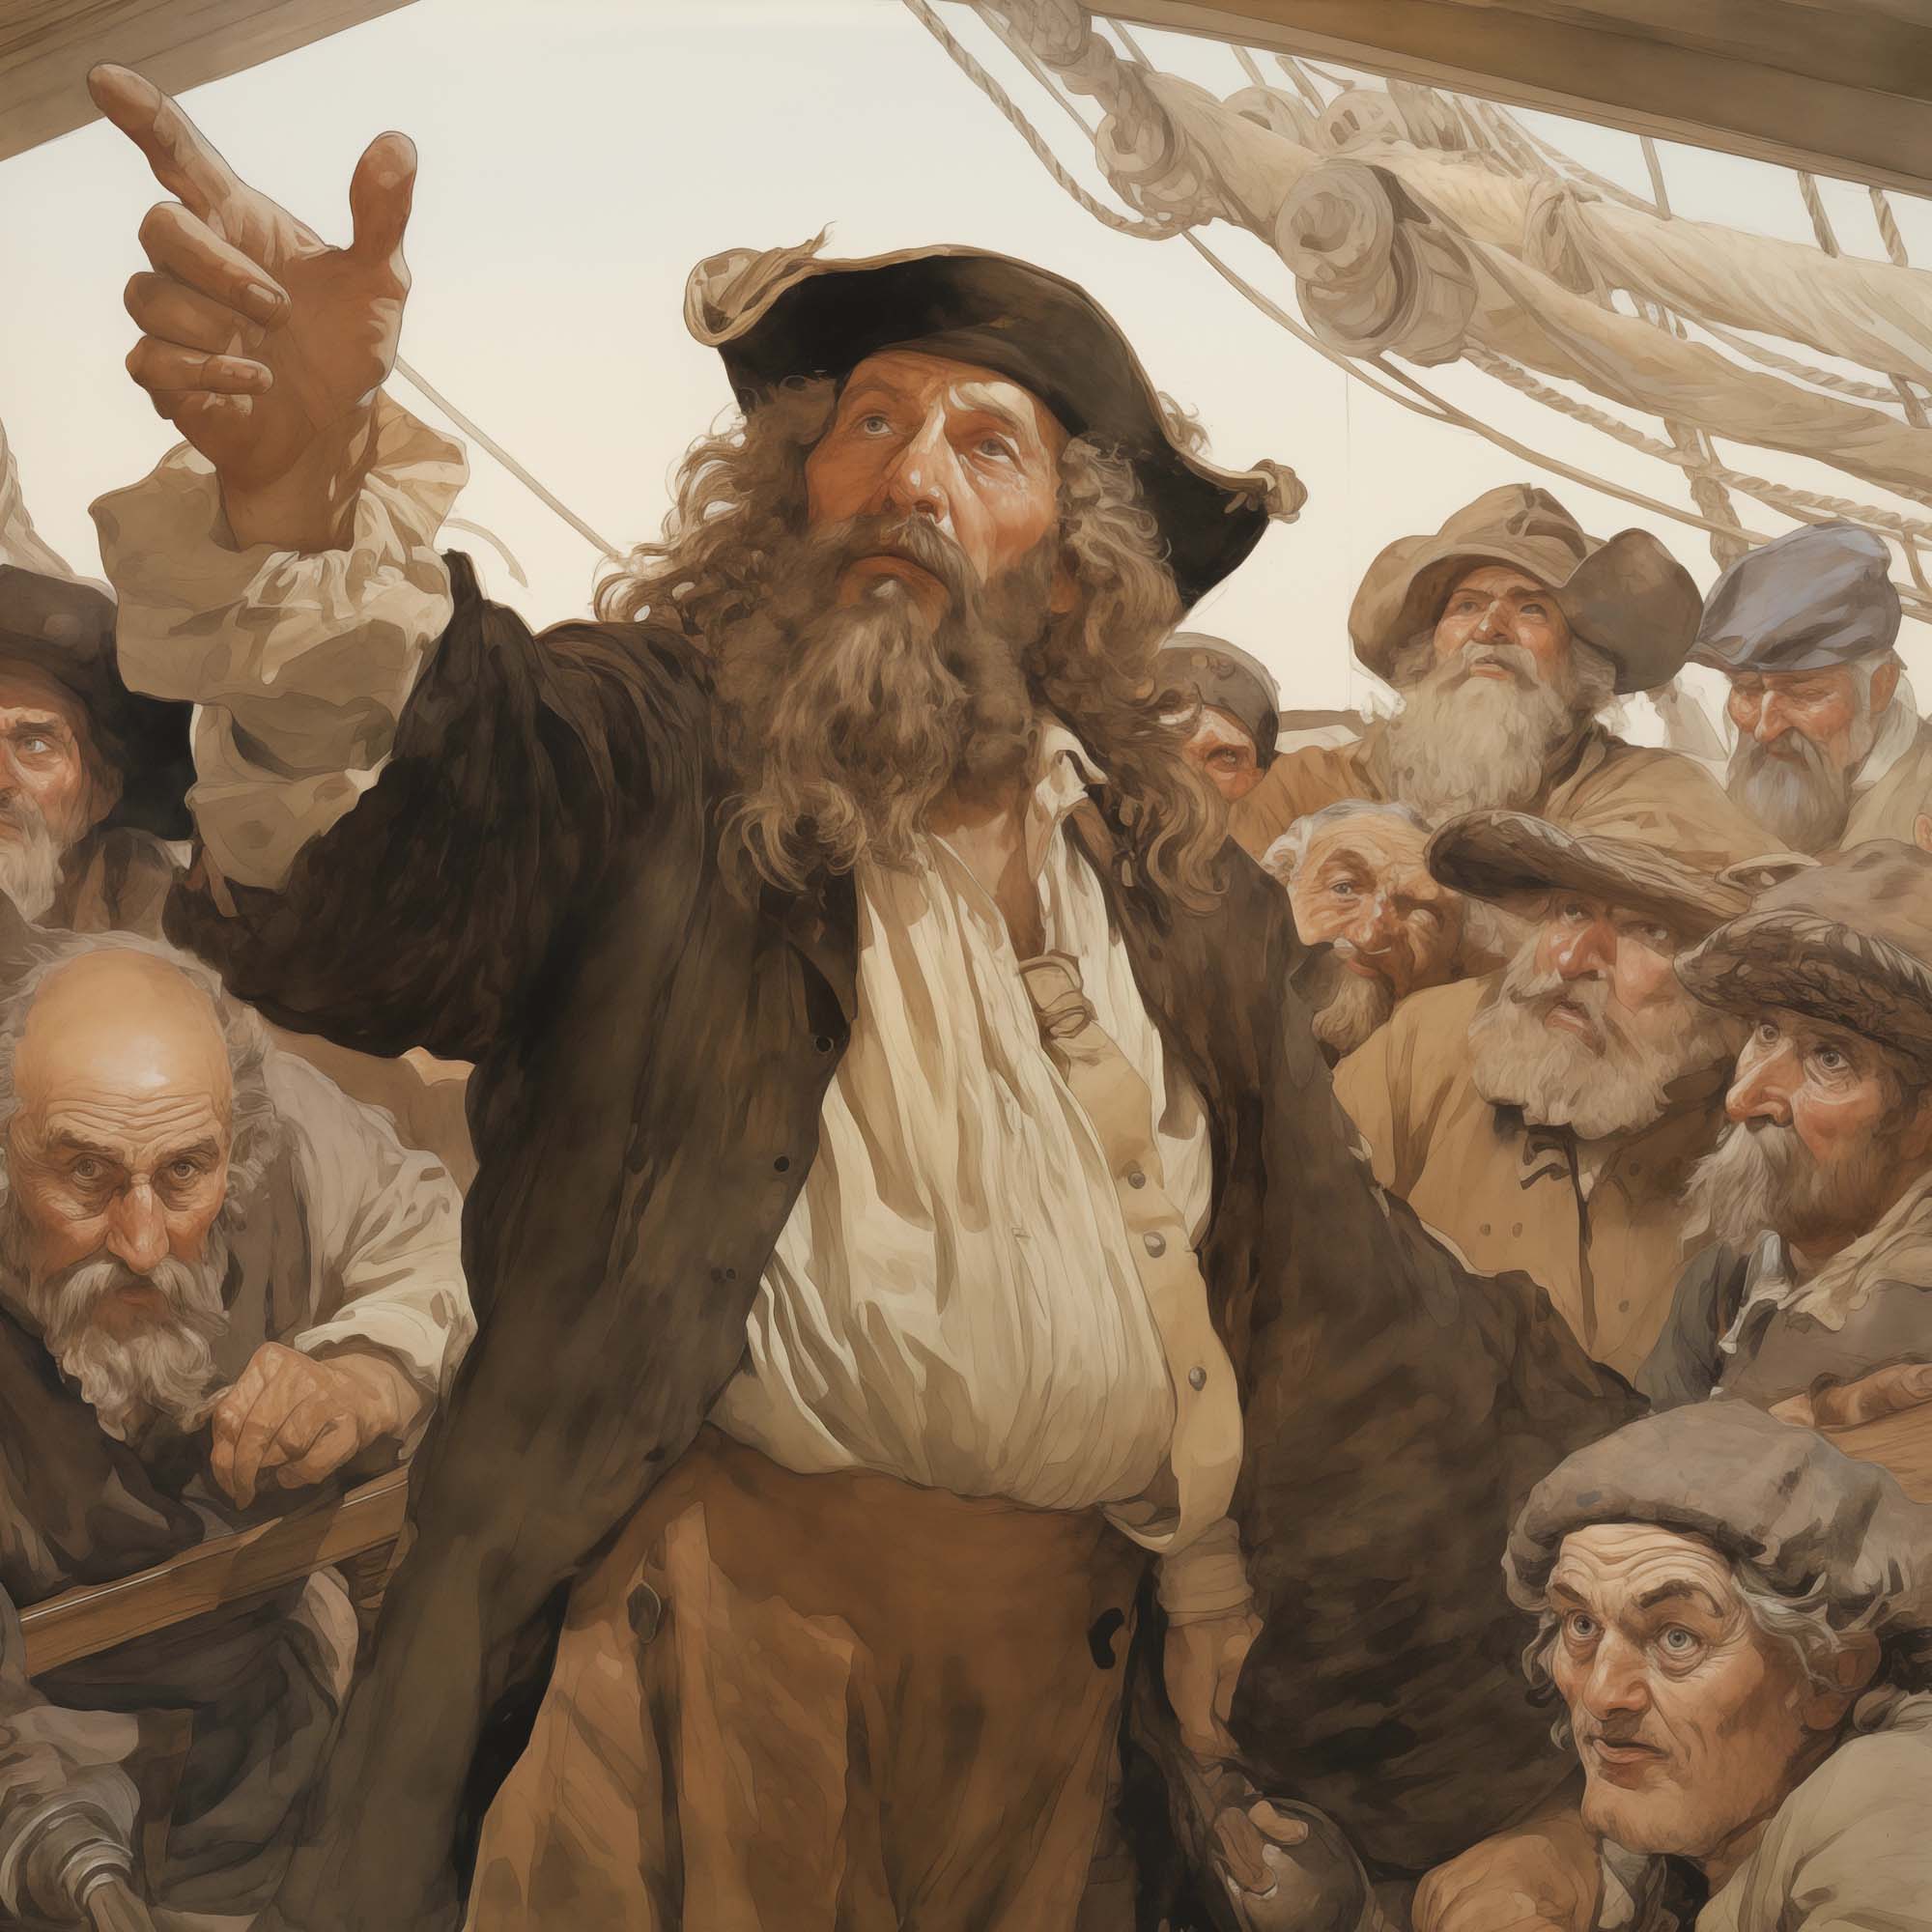 A painting of a sailor talking to his crew.